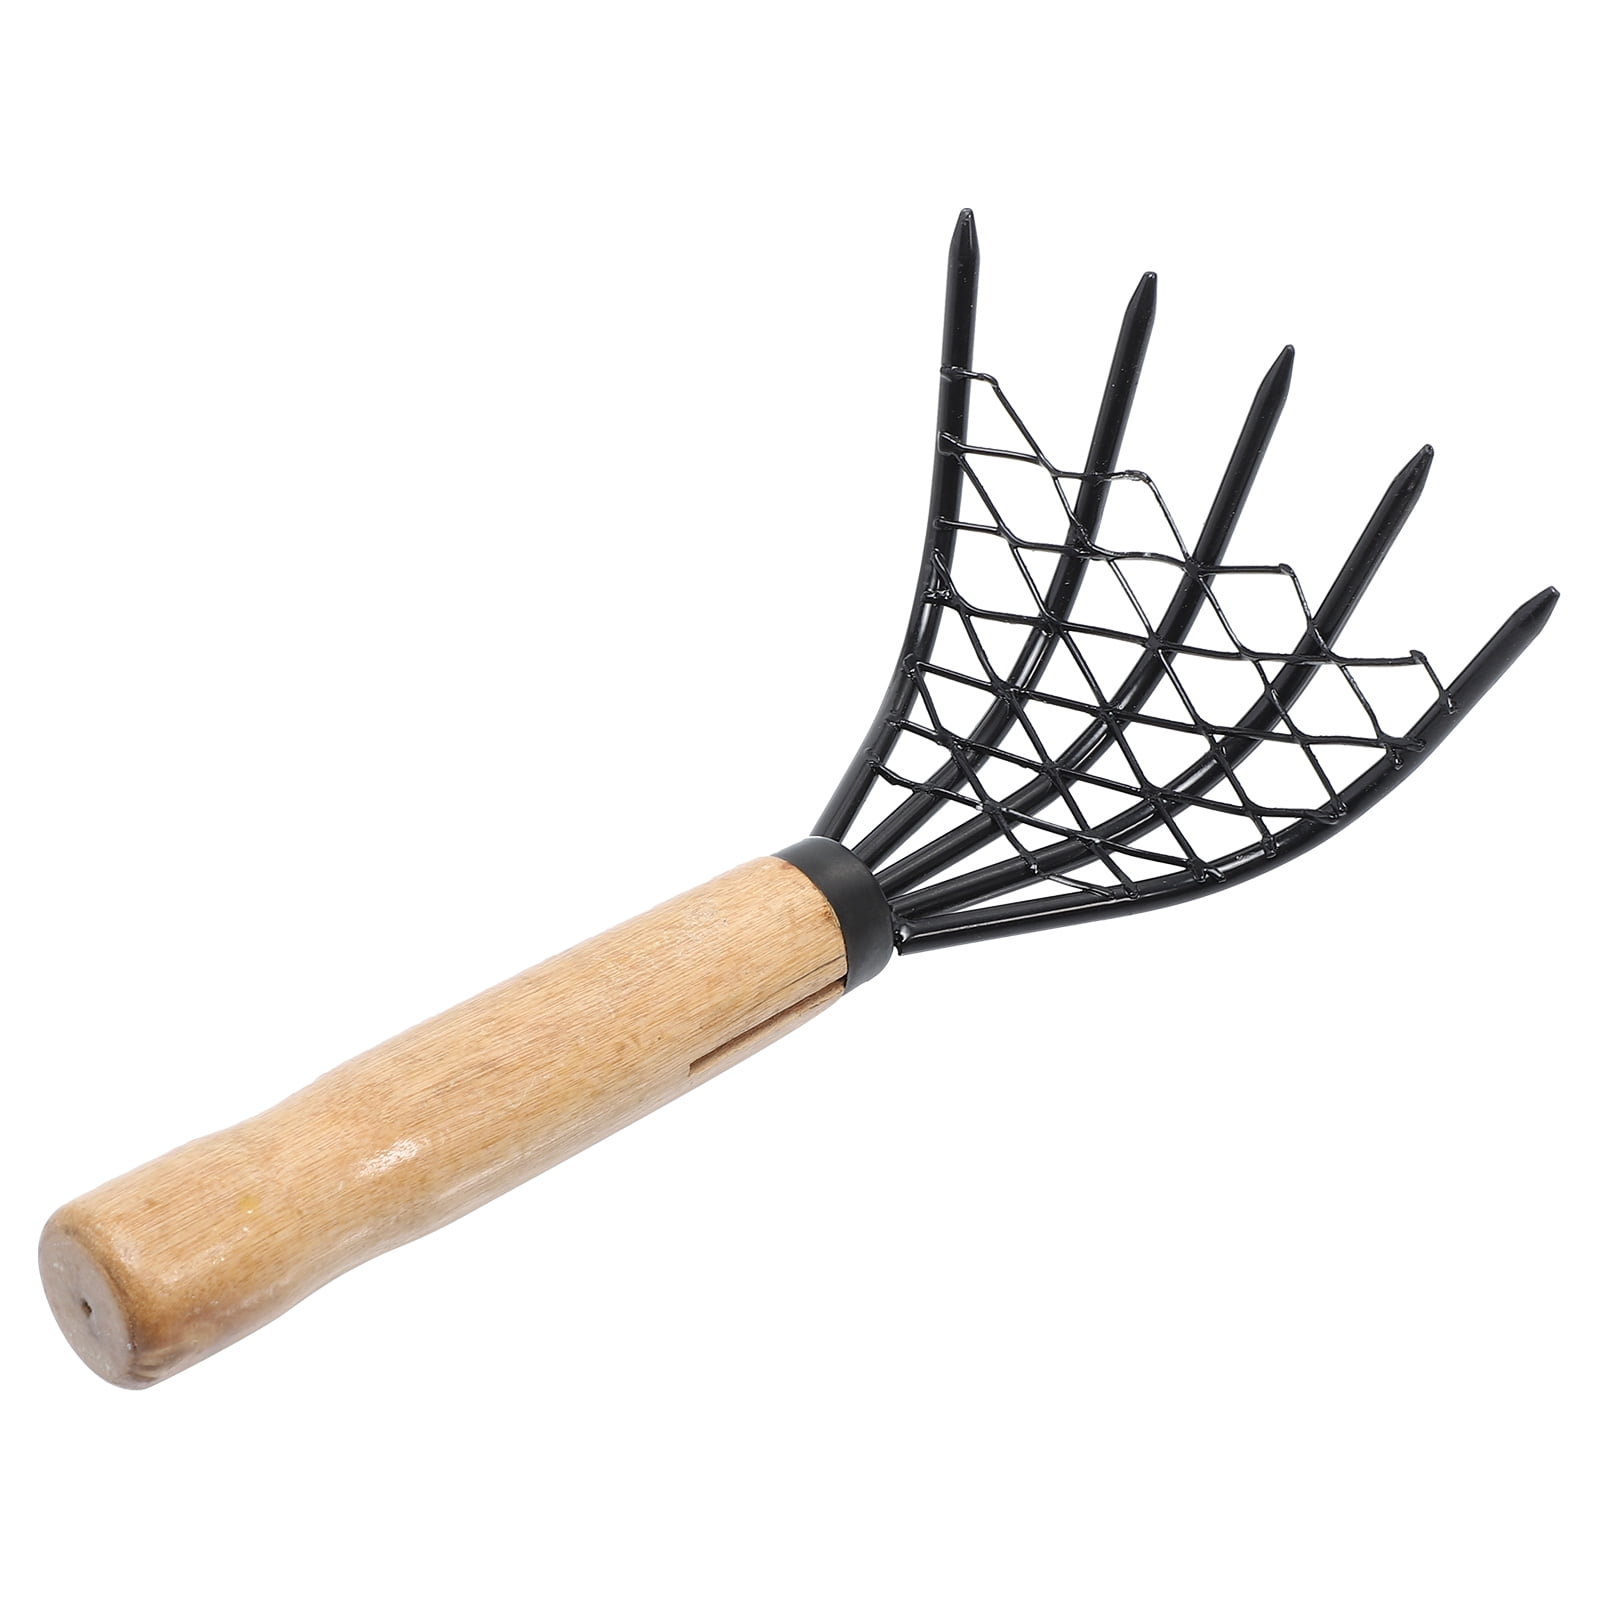 HOMEMAXS 1pc Stainless Steel Clam Rake with Net Oyster Shell Digging ...